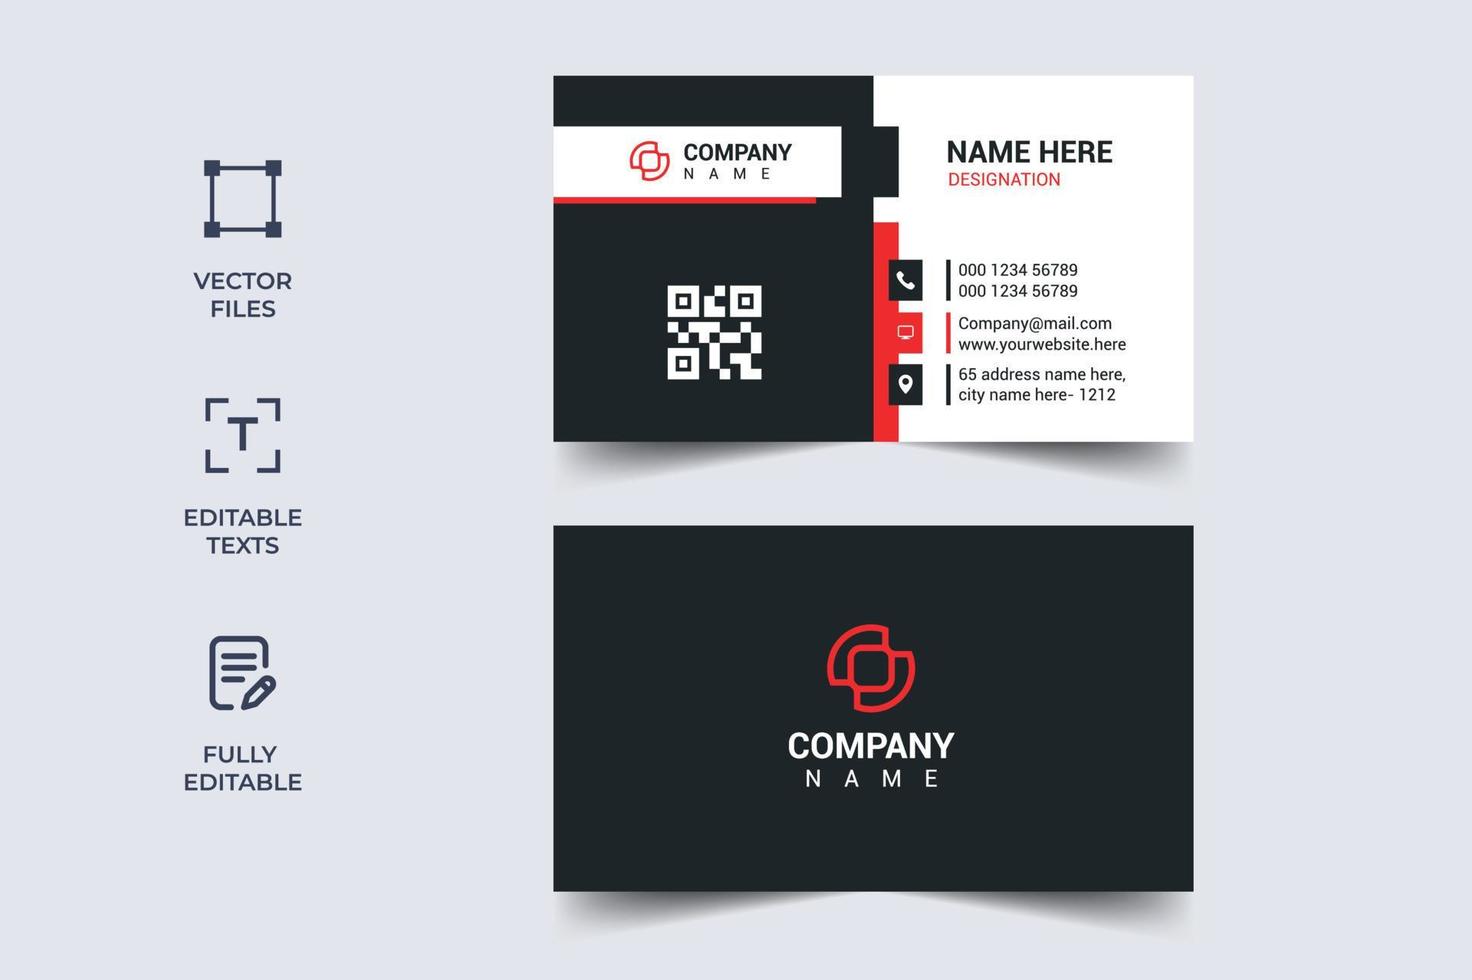 Double Sided Business Card Design Vector Template - Horizontal